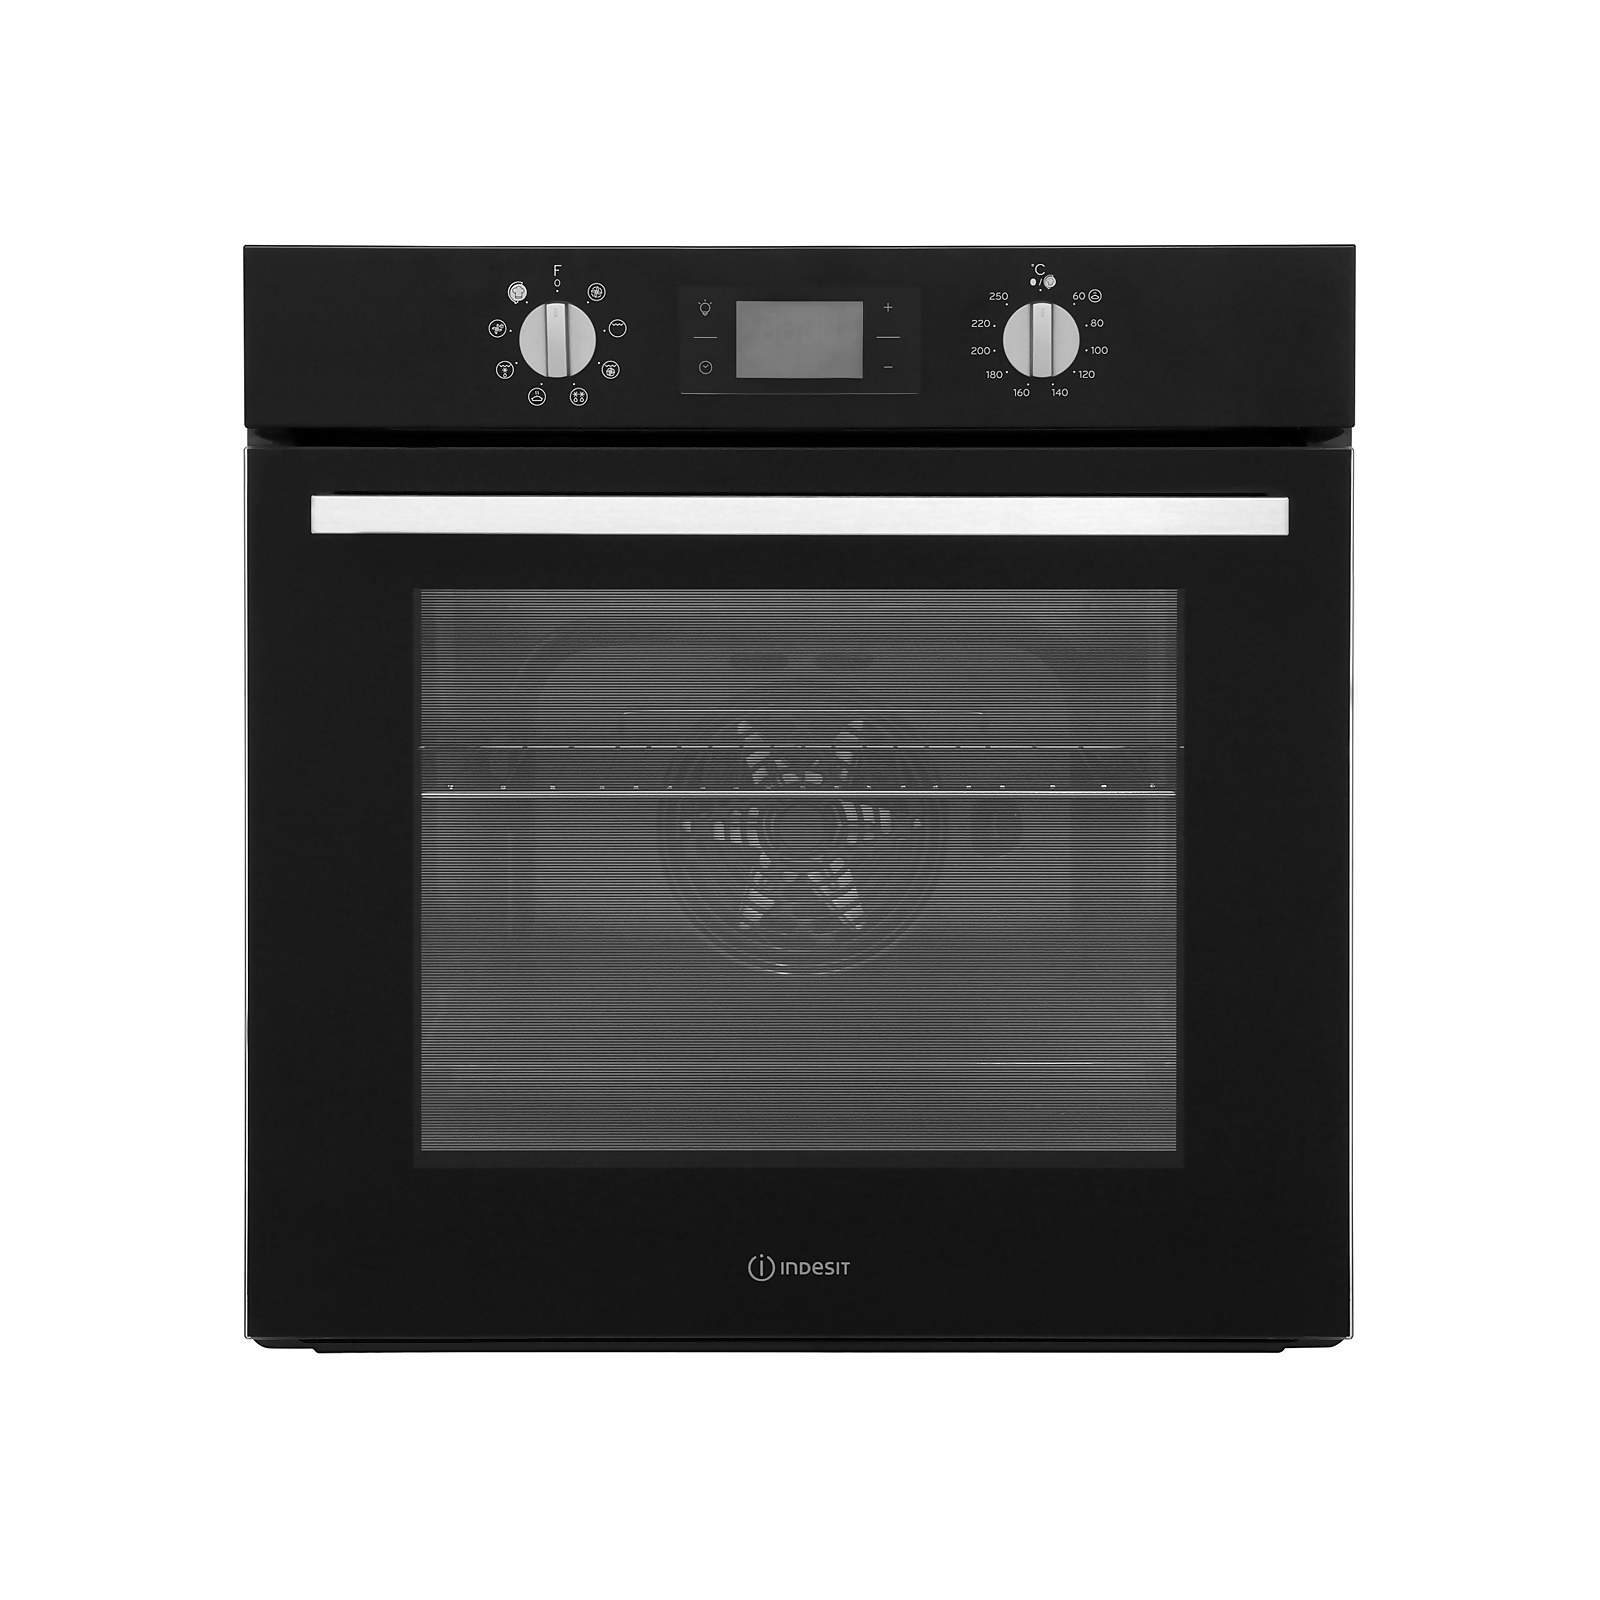 Photo of Indesit Aria Ifw6340bl Built In Electric Single Oven - Black